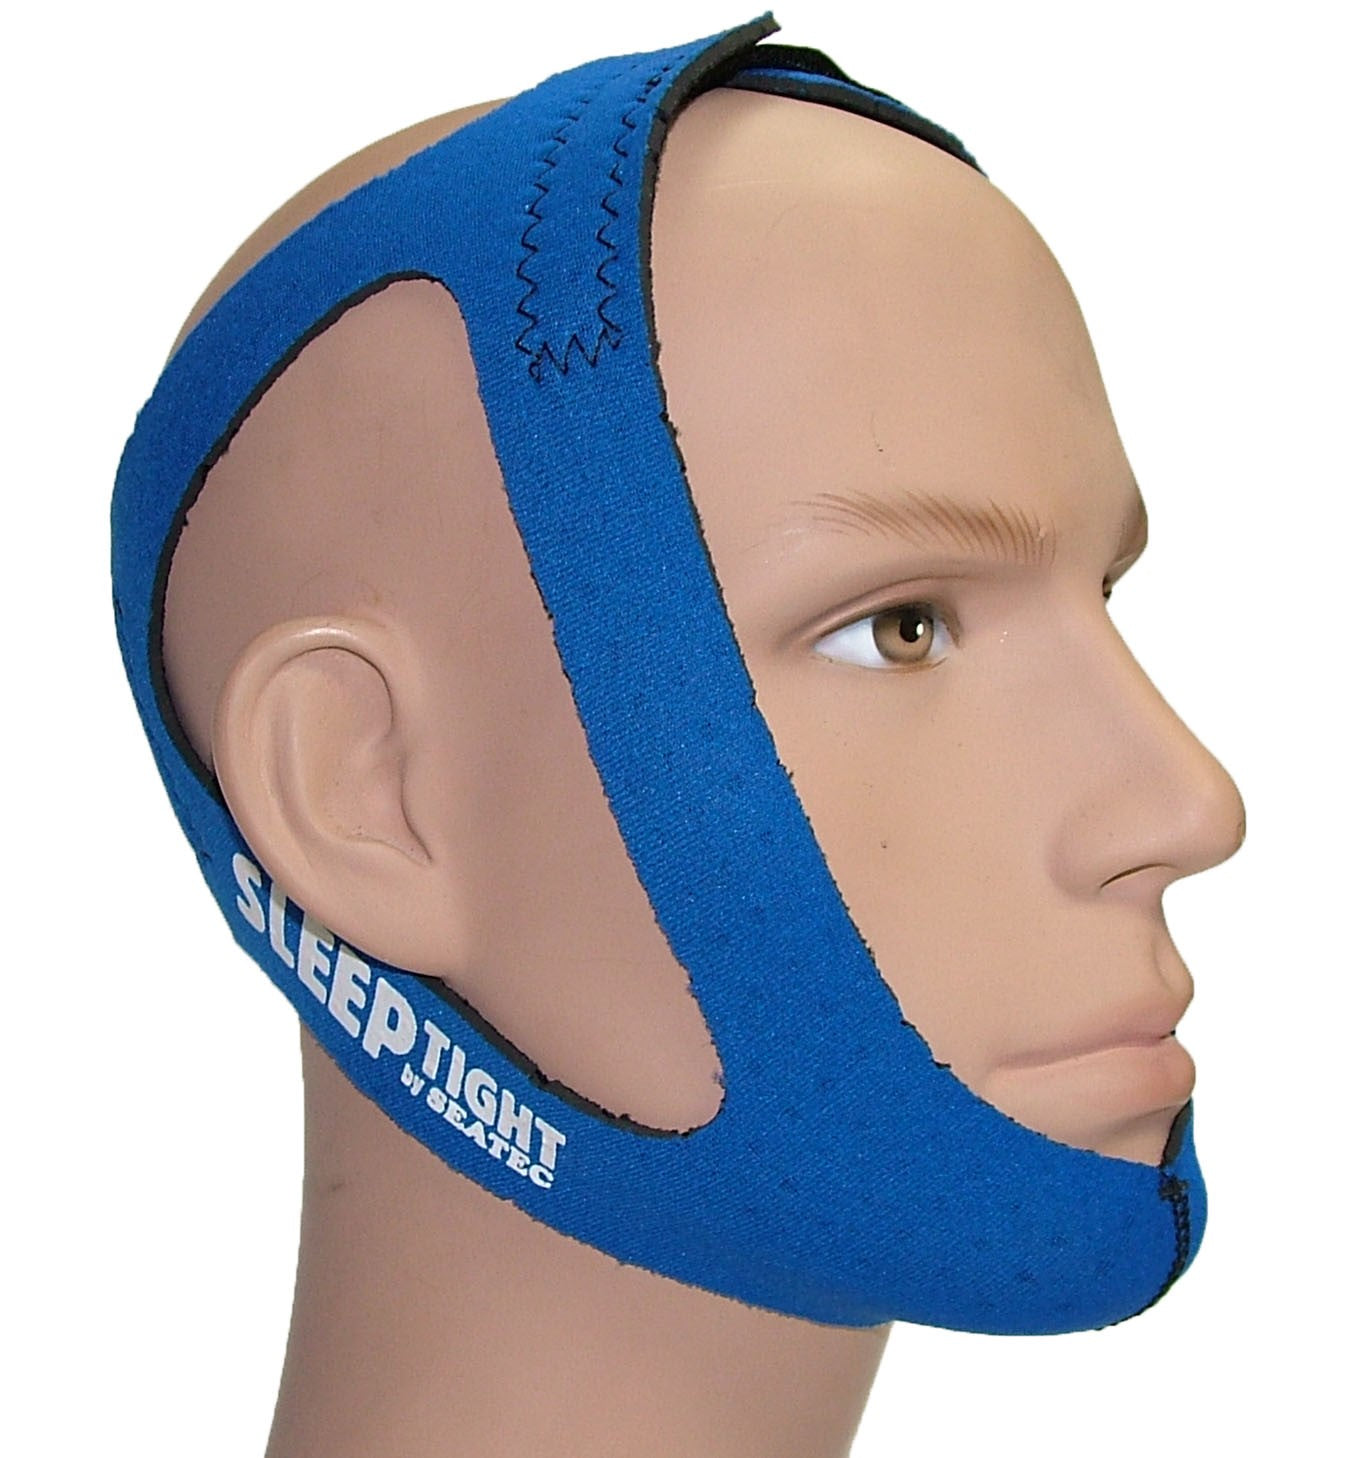 SeaTec Chin Strap by Philips from Easy CPAP